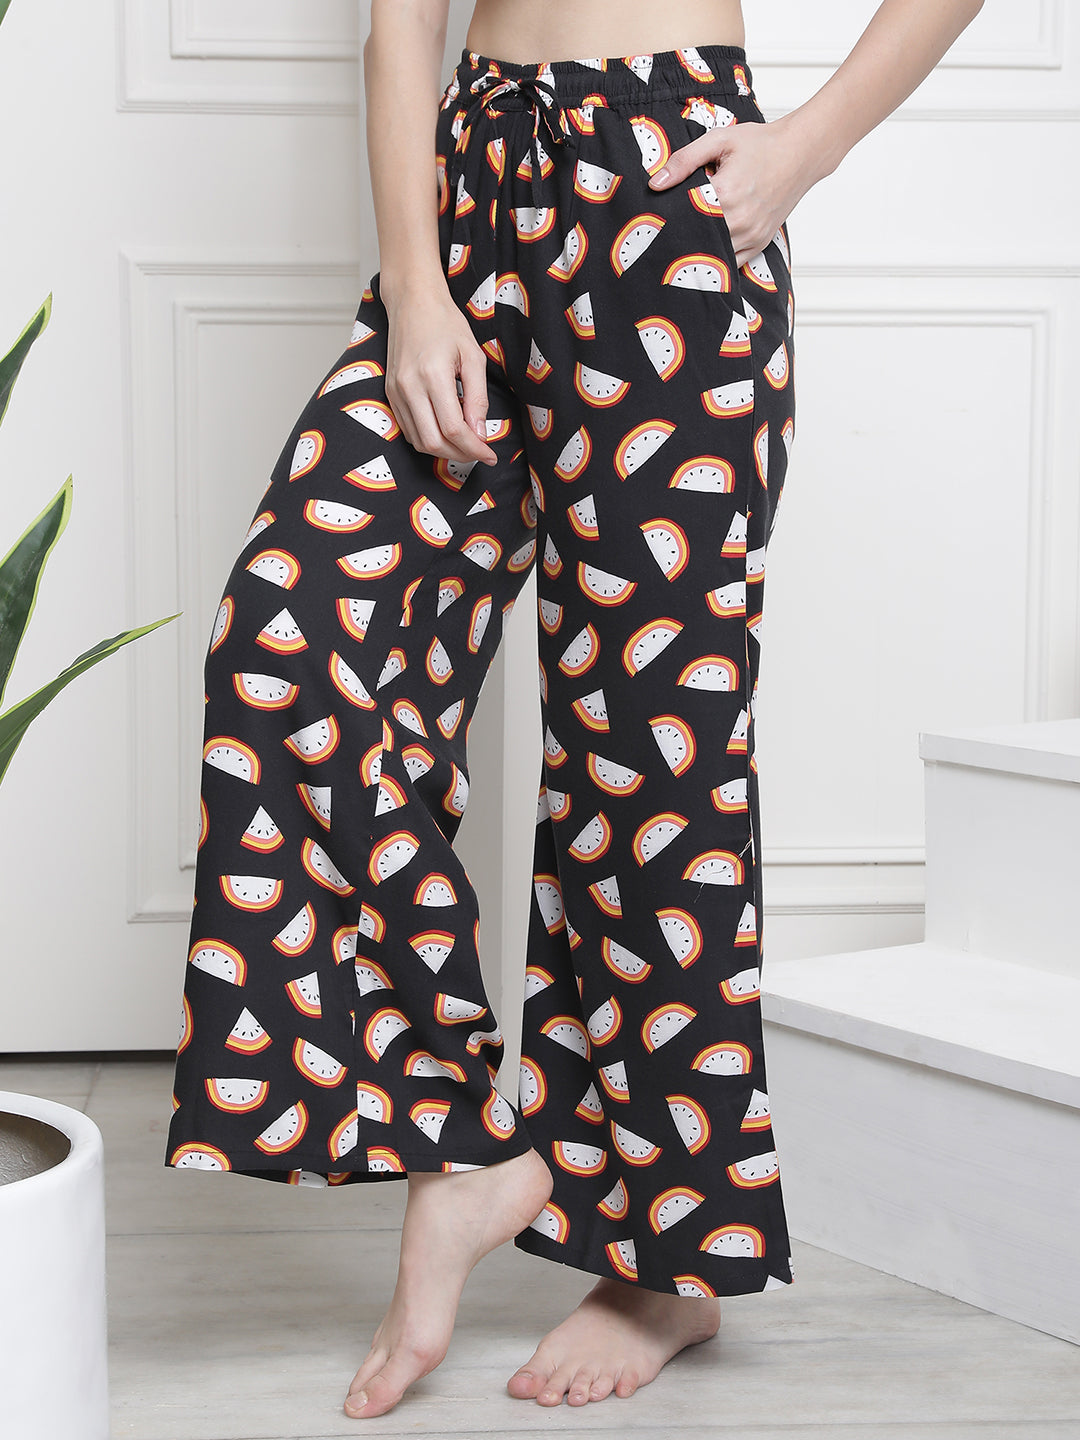 Black Color Abstract Printed Viscose Rayon Lower For Women Claura Designs Pvt. Ltd. Lounge Pants Abstract, Black, Flarred, Lounge Pant, Loungepant_size, Lower, pajama, Pants, Plazzo, Rayon, Women